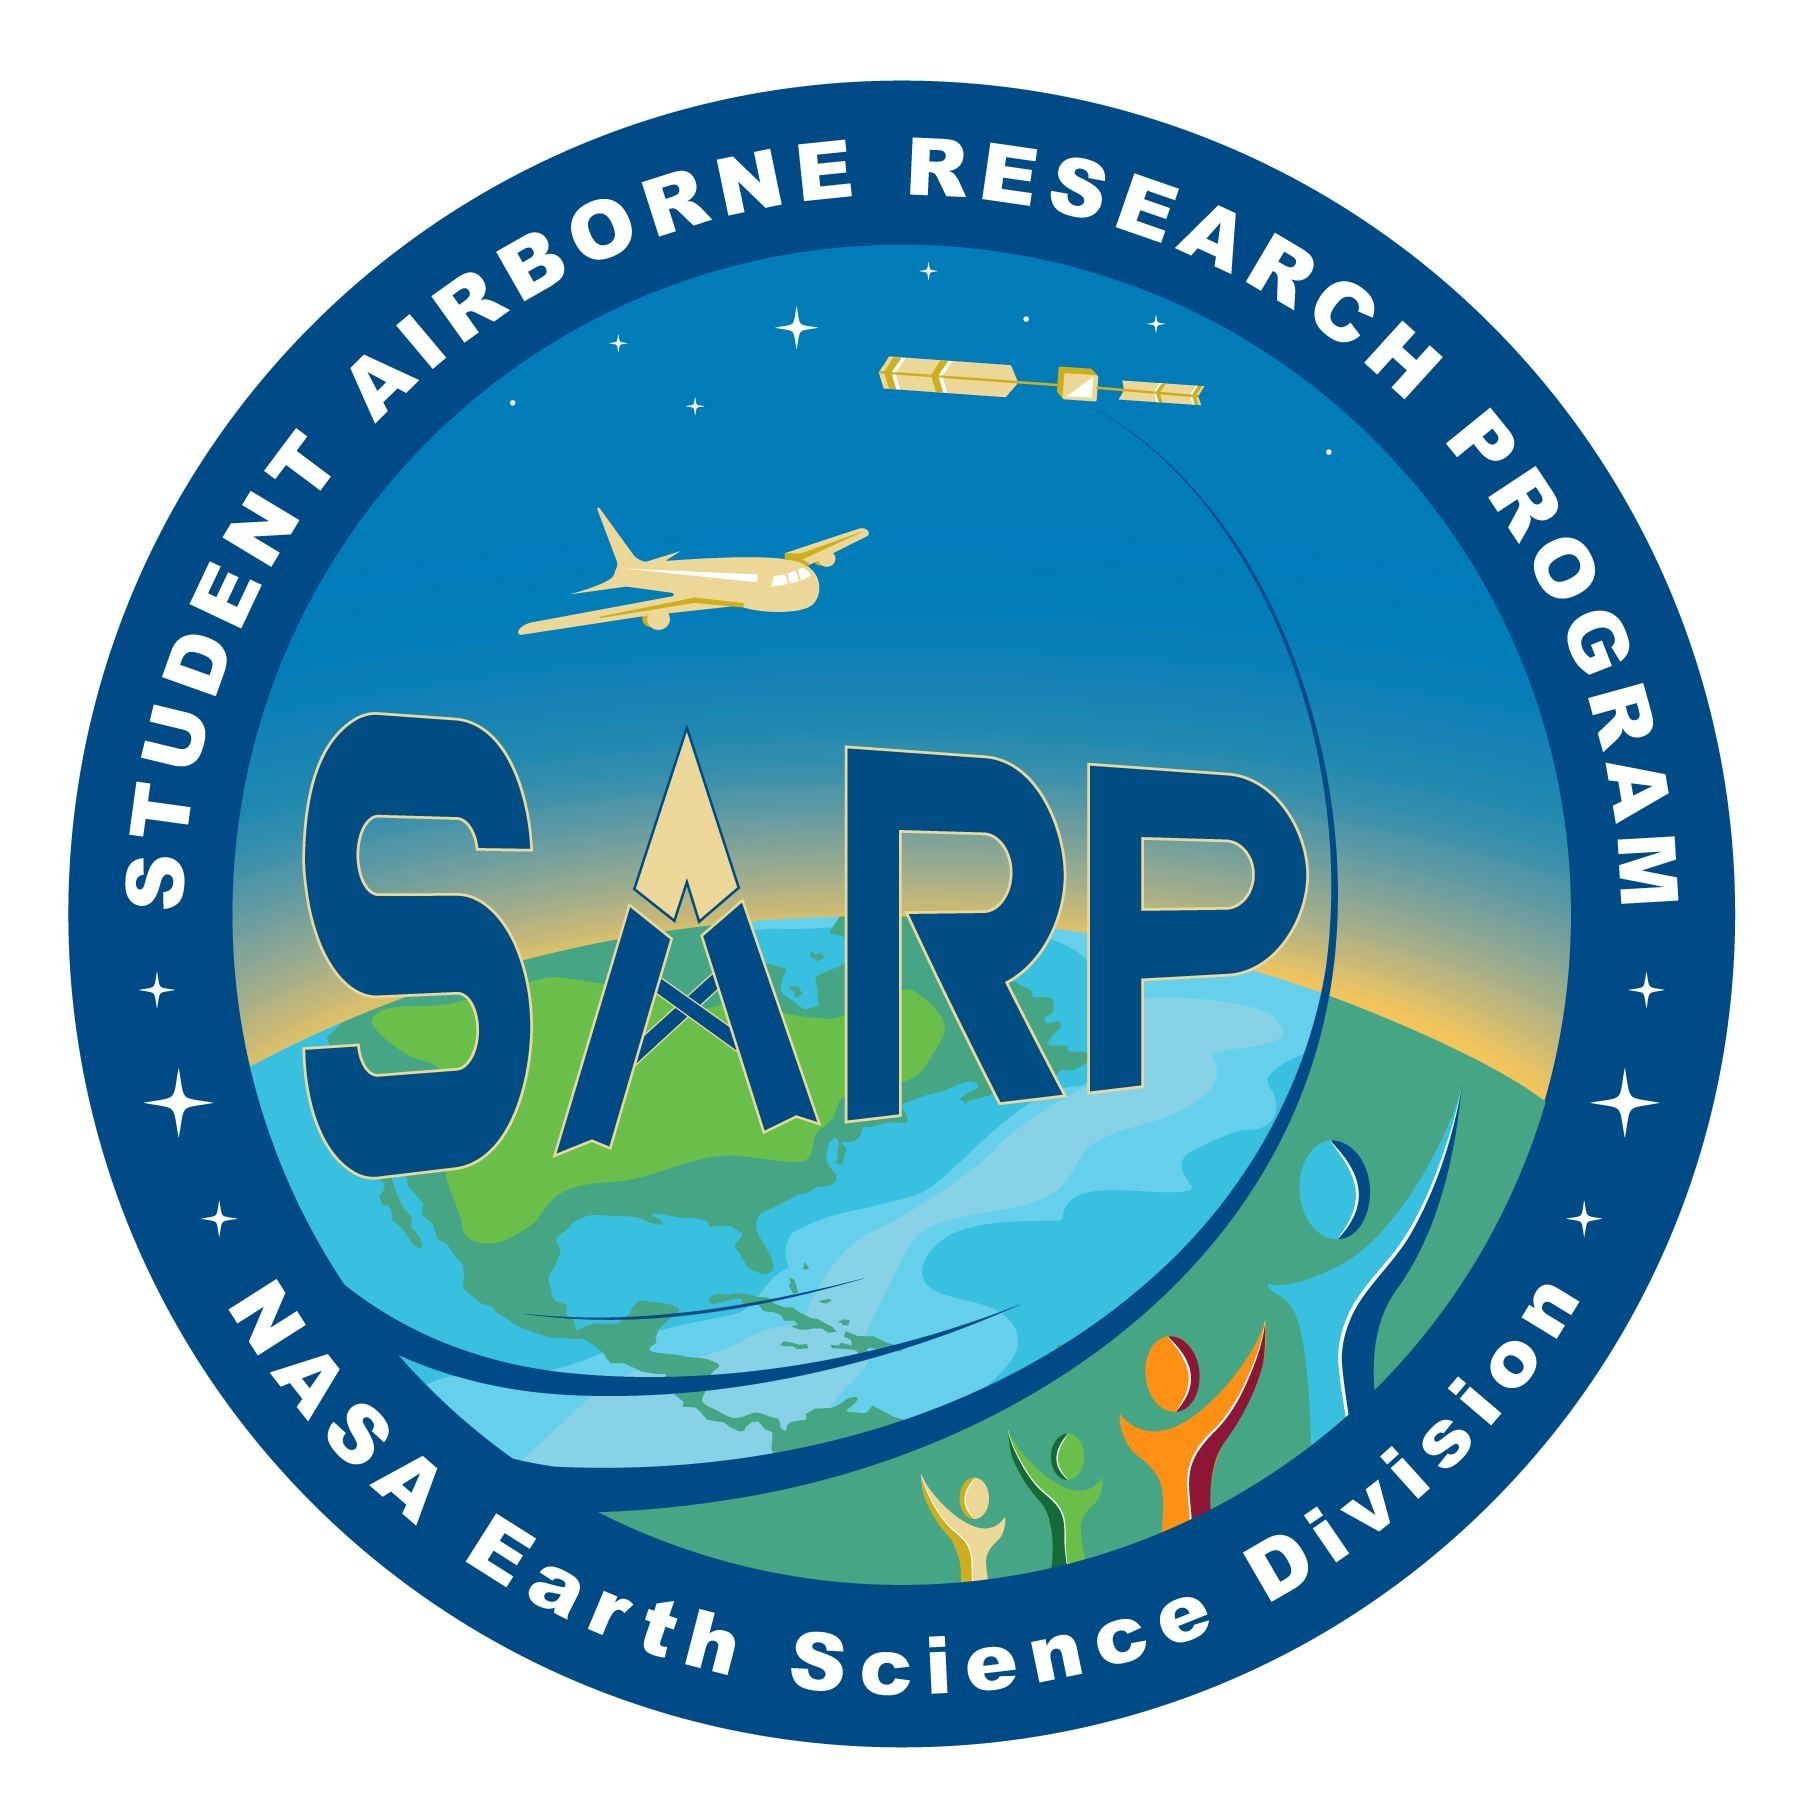 NASA SARP patch which include an aircraft flying over the US and collecting data. There is also a satellite in the distance. 4 figures are at the base of the image, indicating the lifecycle of the program - collection and use of field, airborne, and satellite data.